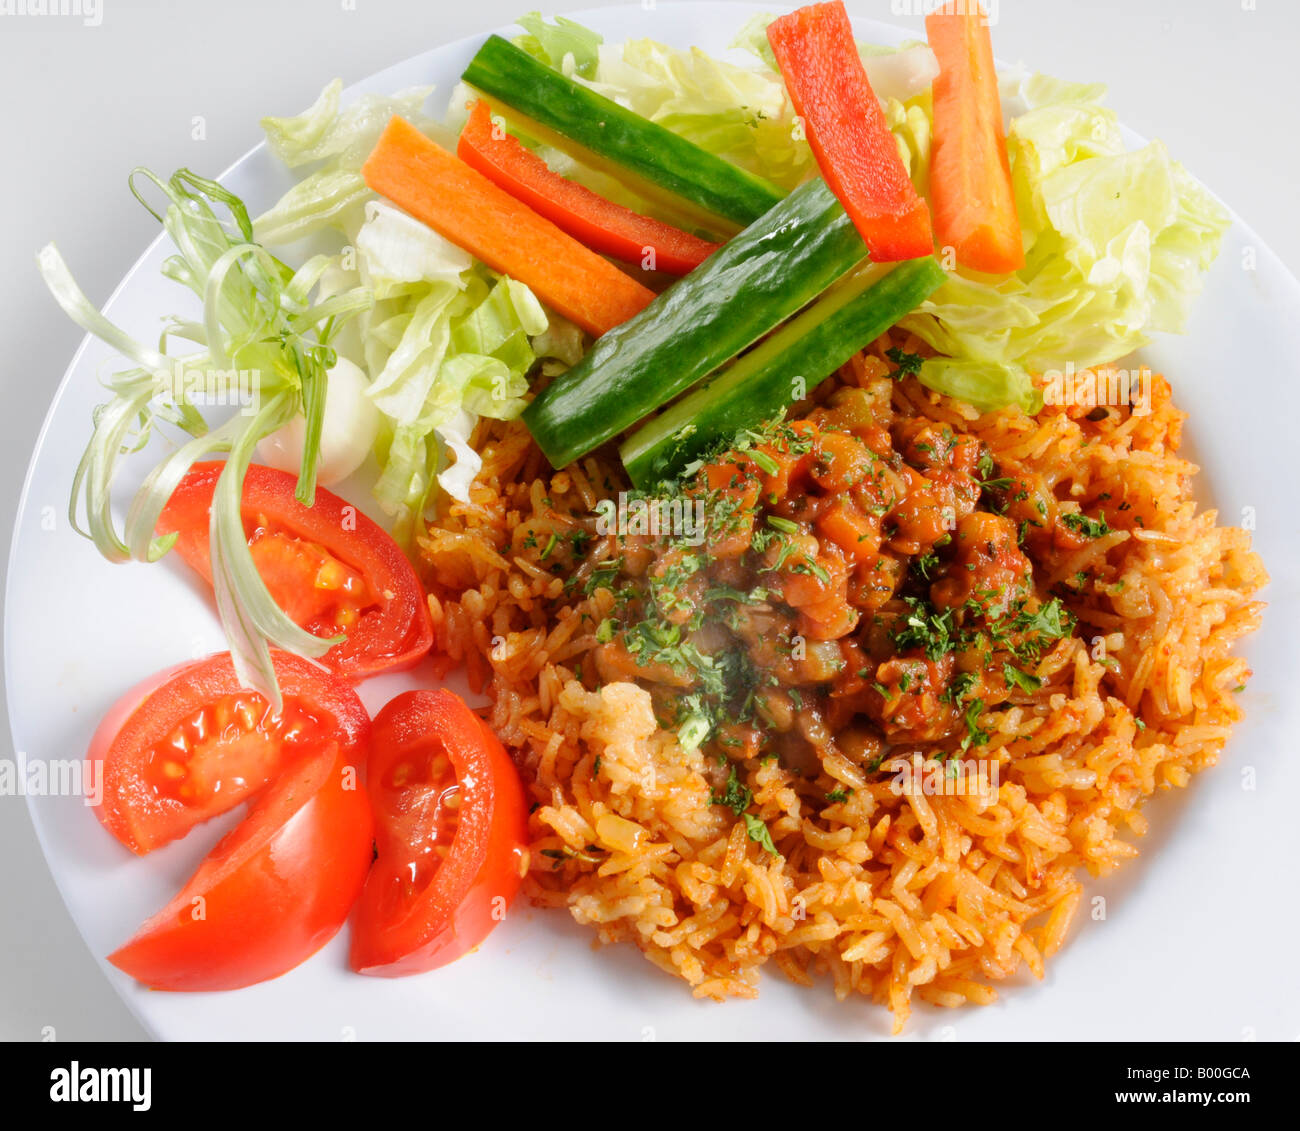 HEALTHY SCHOOL MEAL WITH SALAD Stock Photo